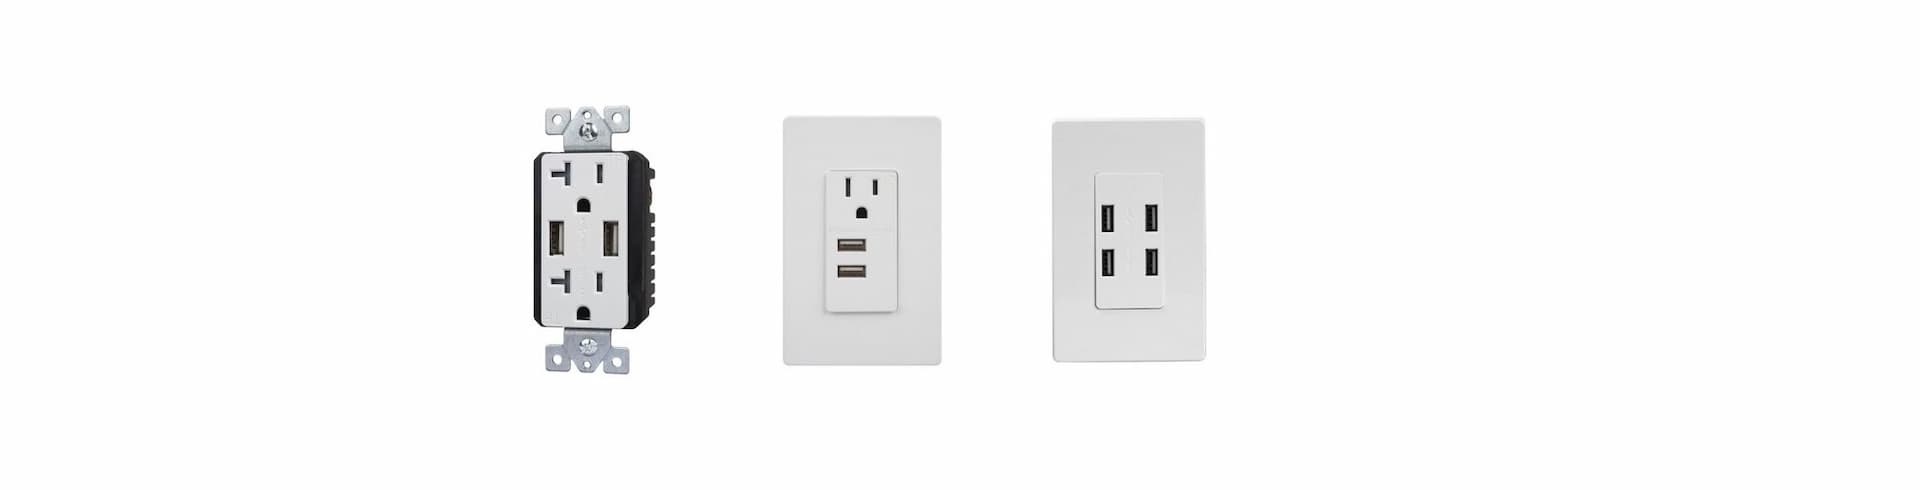 Outlet options